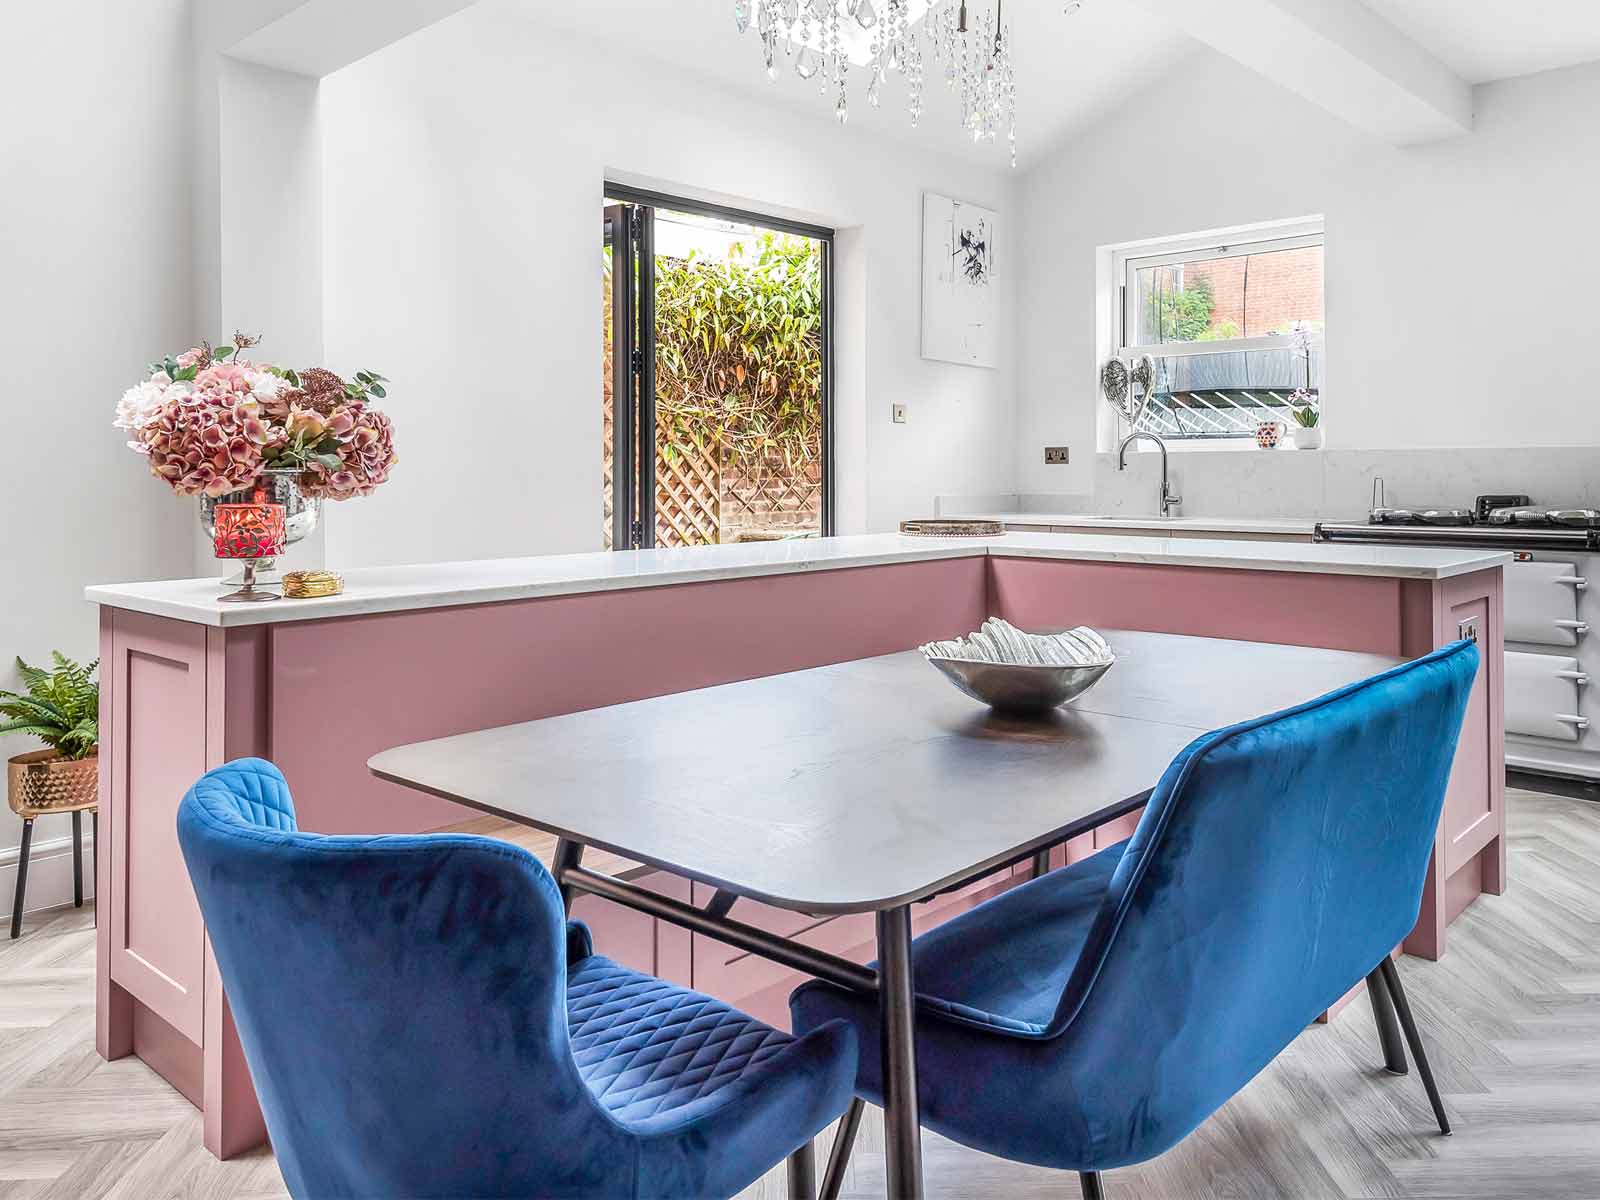 A pink kitchen range with Mexican kitsch bouquets and blue velvet chairs